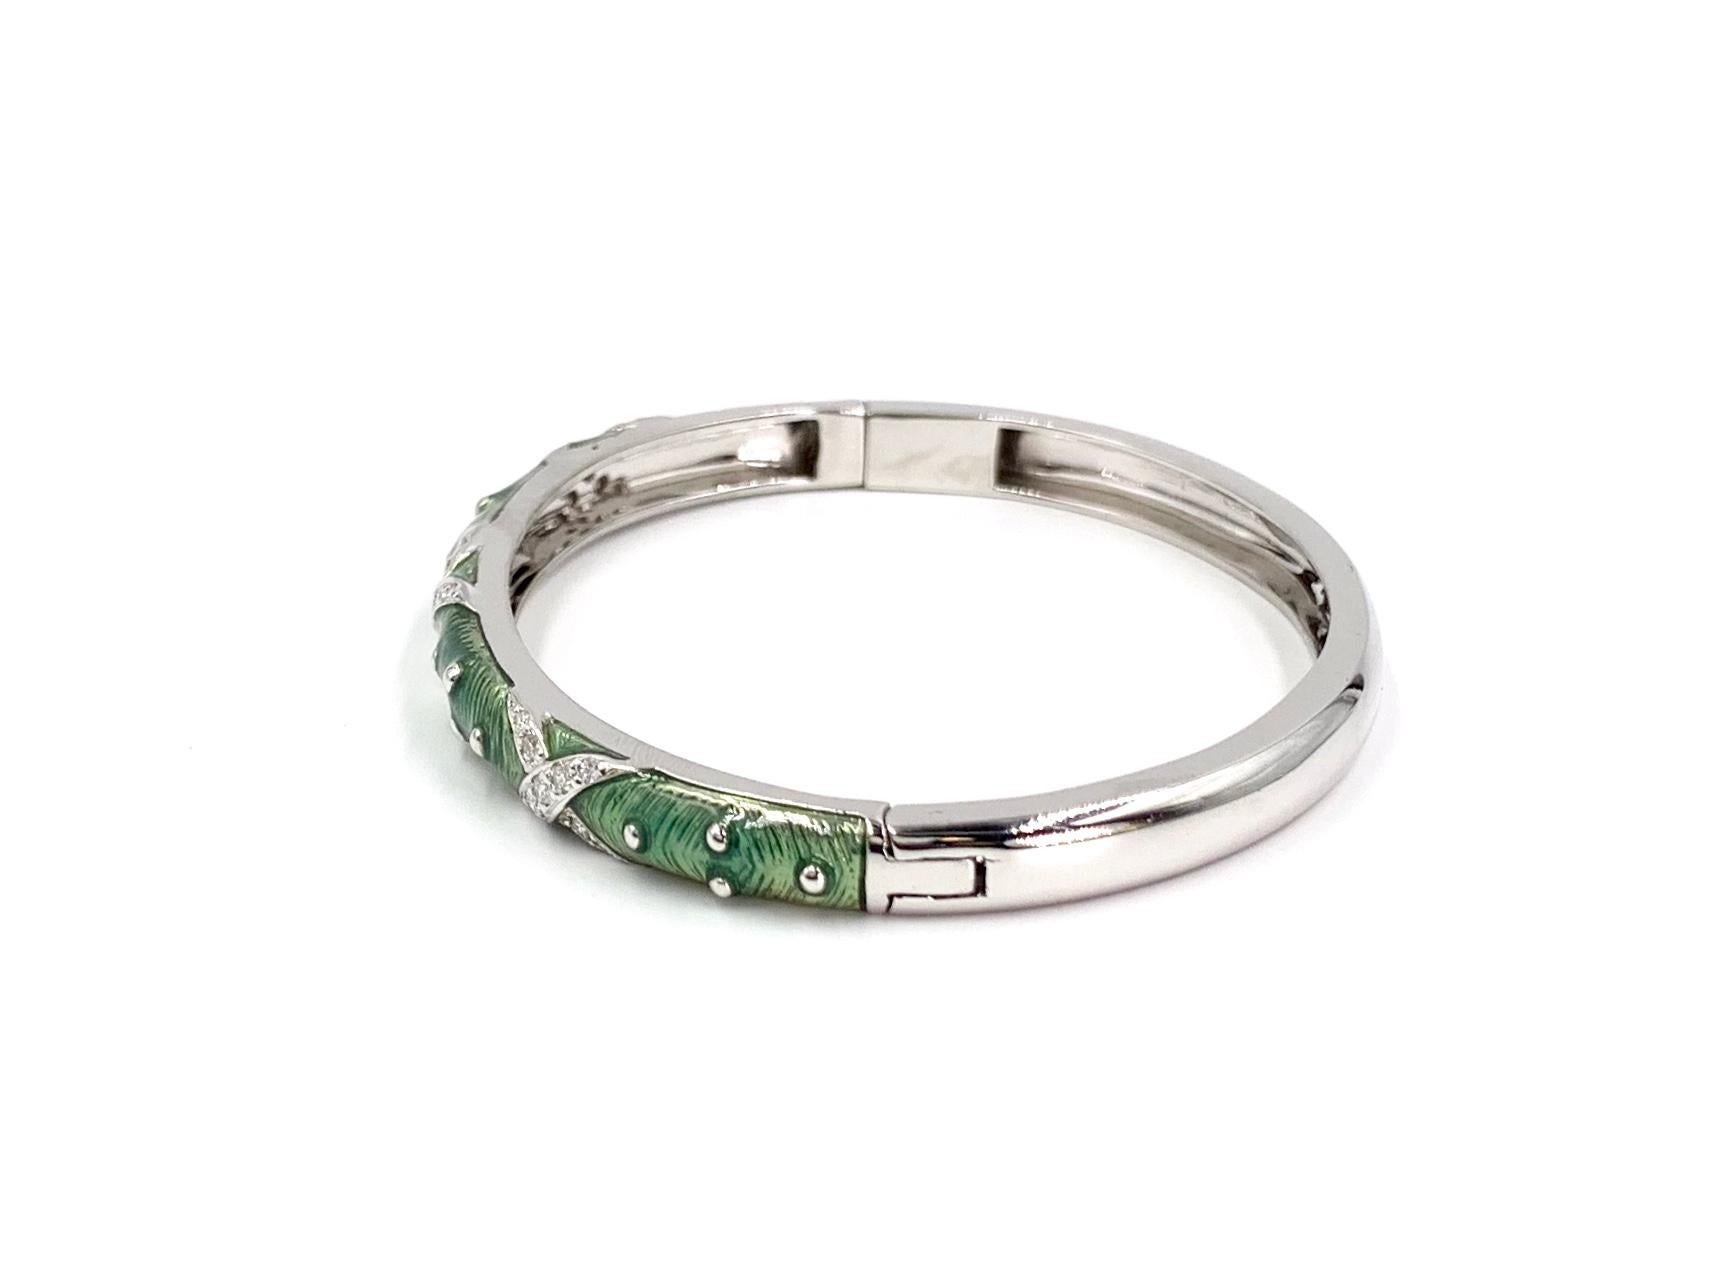 Hidalgo 18 Karat White Gold Light Green Enamel and Diamond Bangle Bracelet In Excellent Condition For Sale In Pikesville, MD